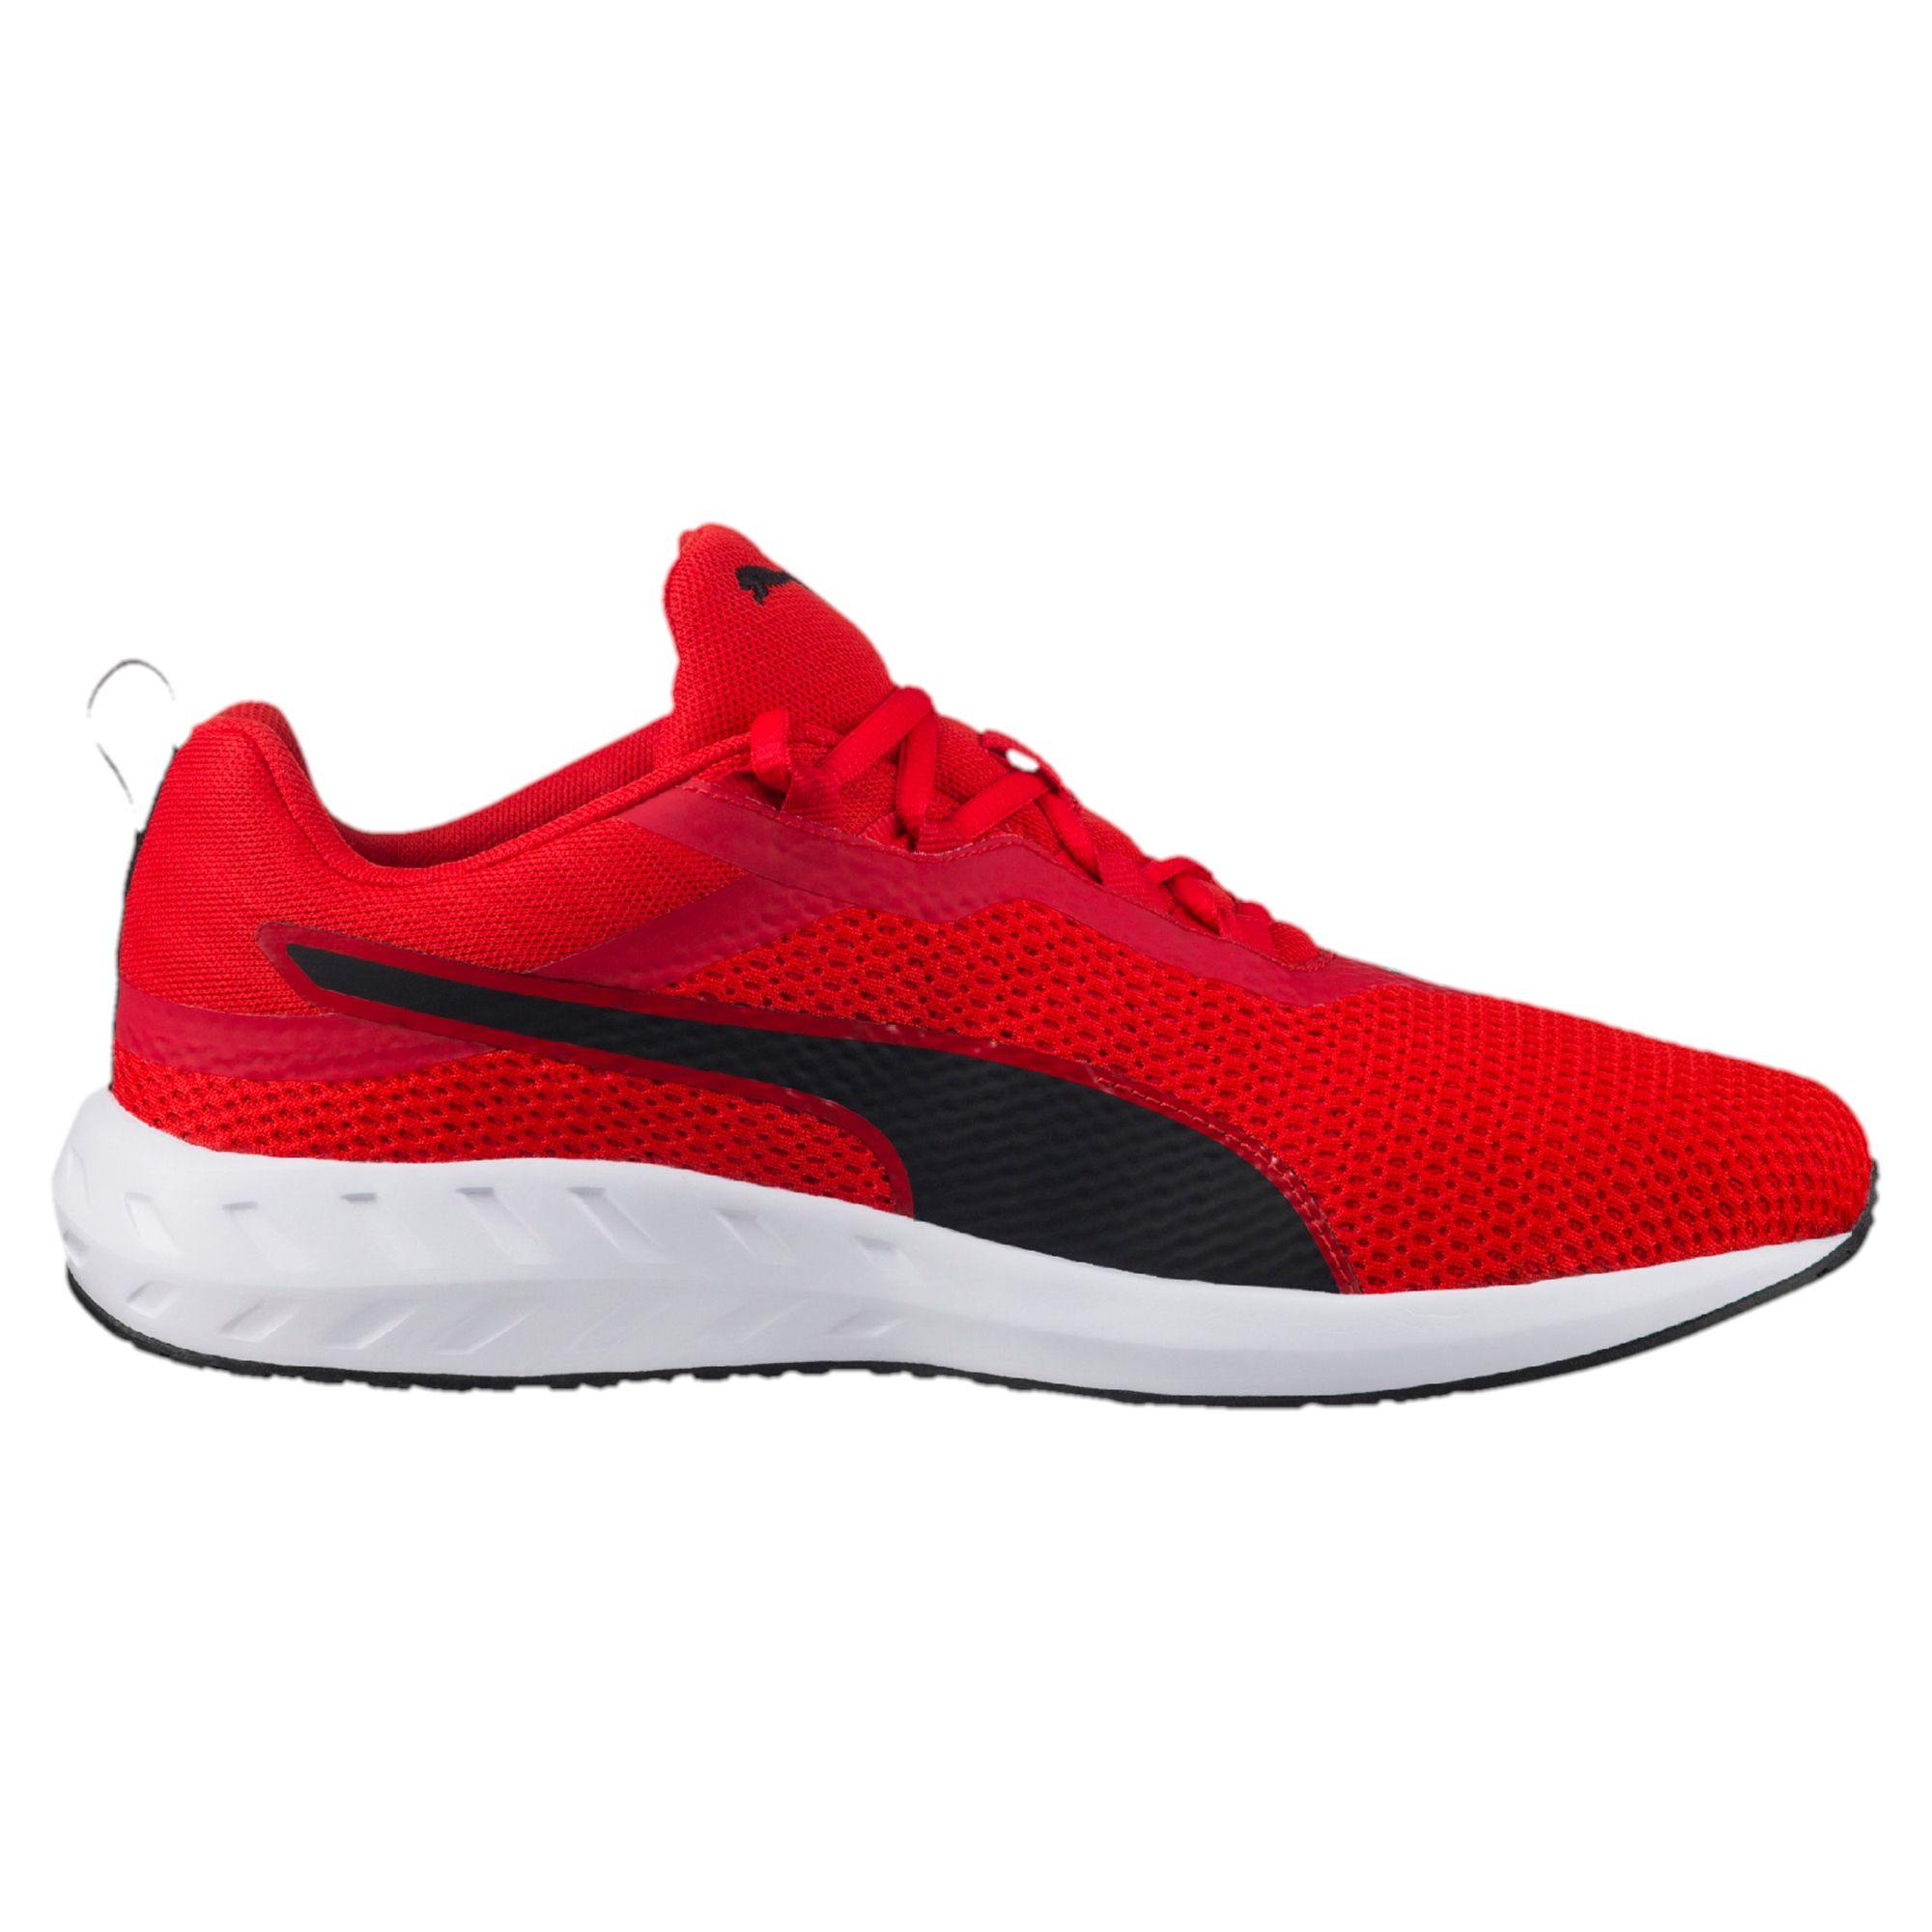 PUMA Rubber Flare 2 Men's Running Shoes in Red for Men - Lyst